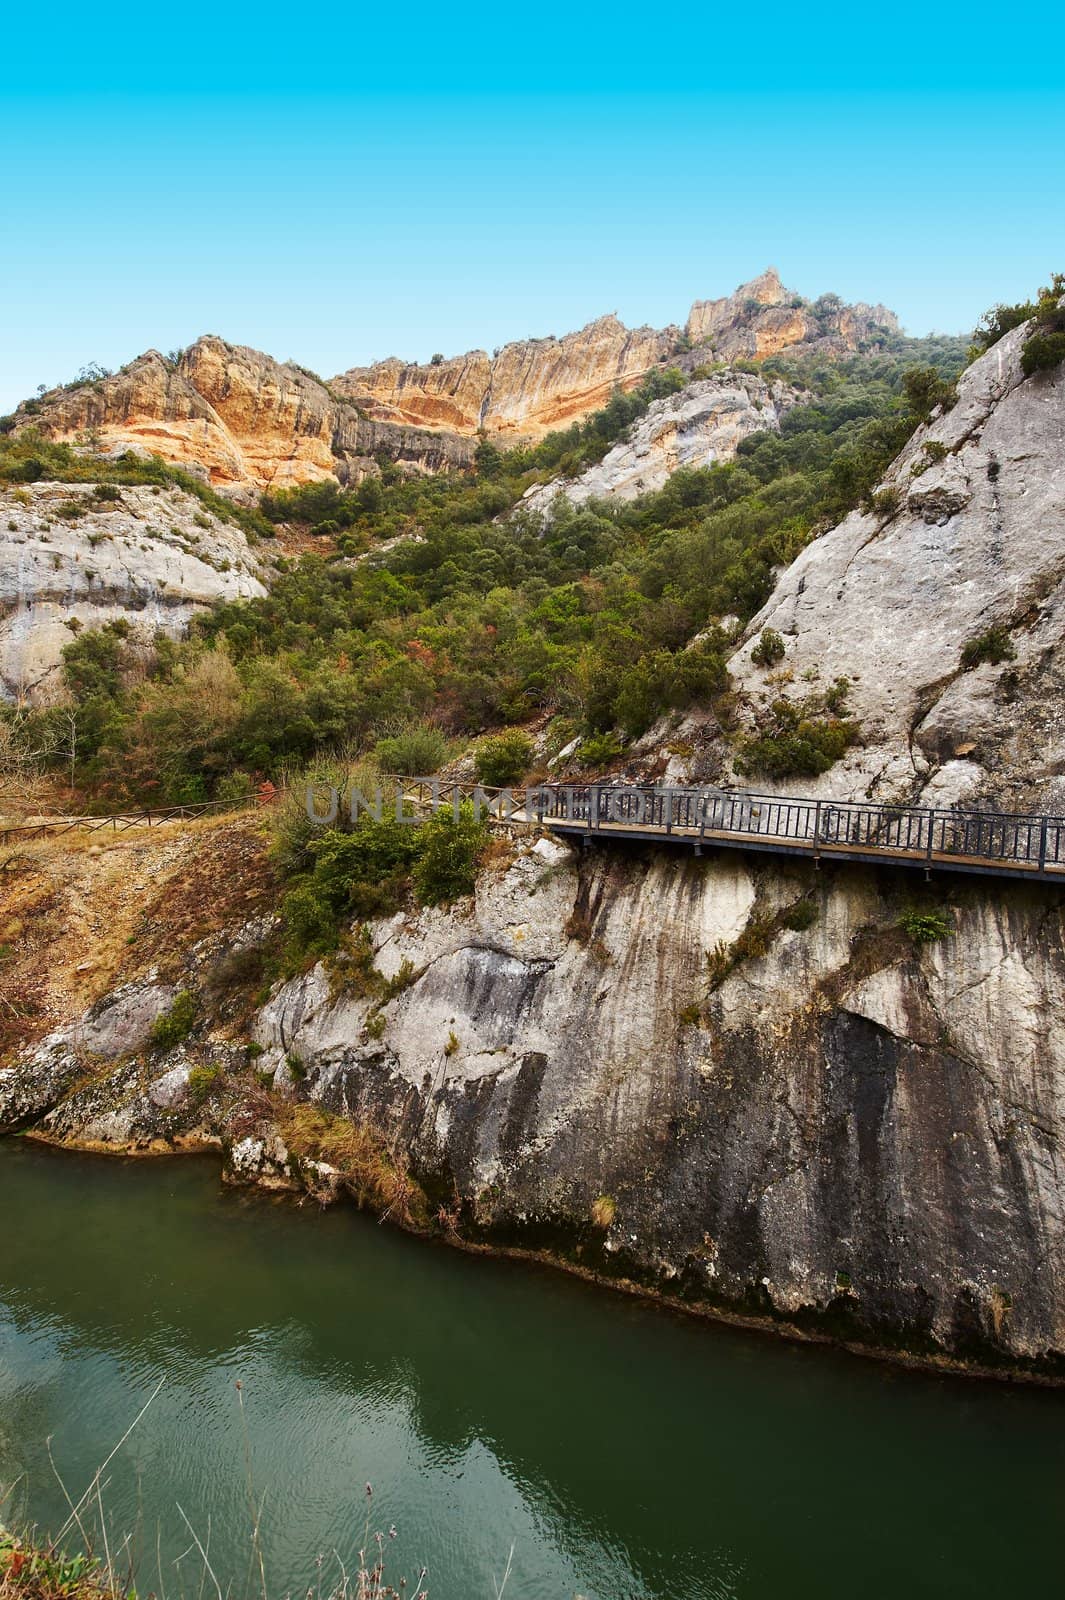 Mounted on the Rocks Wooden Bridge over the River Aragon